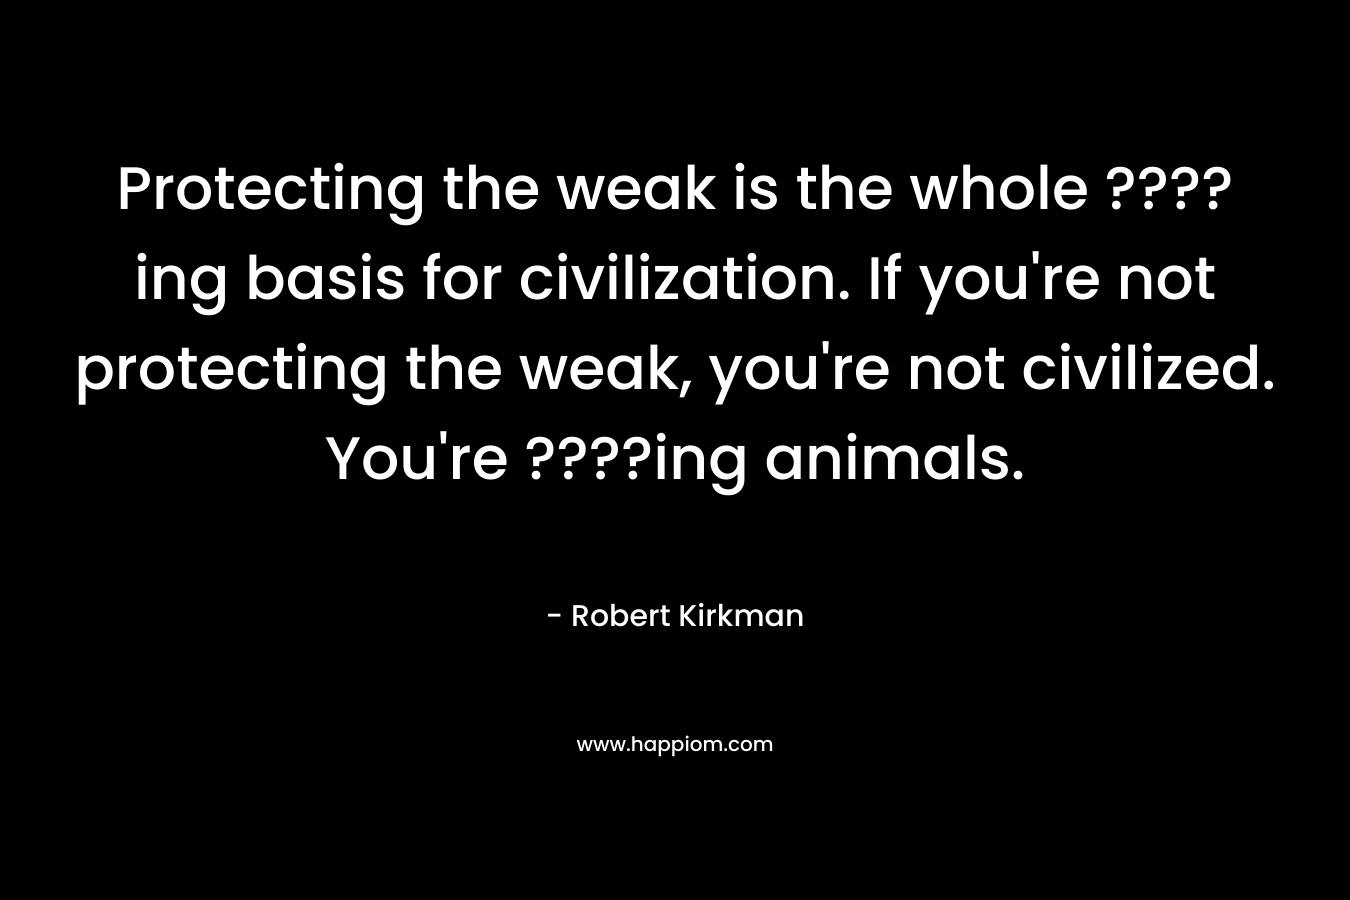 Protecting the weak is the whole ????ing basis for civilization. If you're not protecting the weak, you're not civilized. You're ????ing animals.